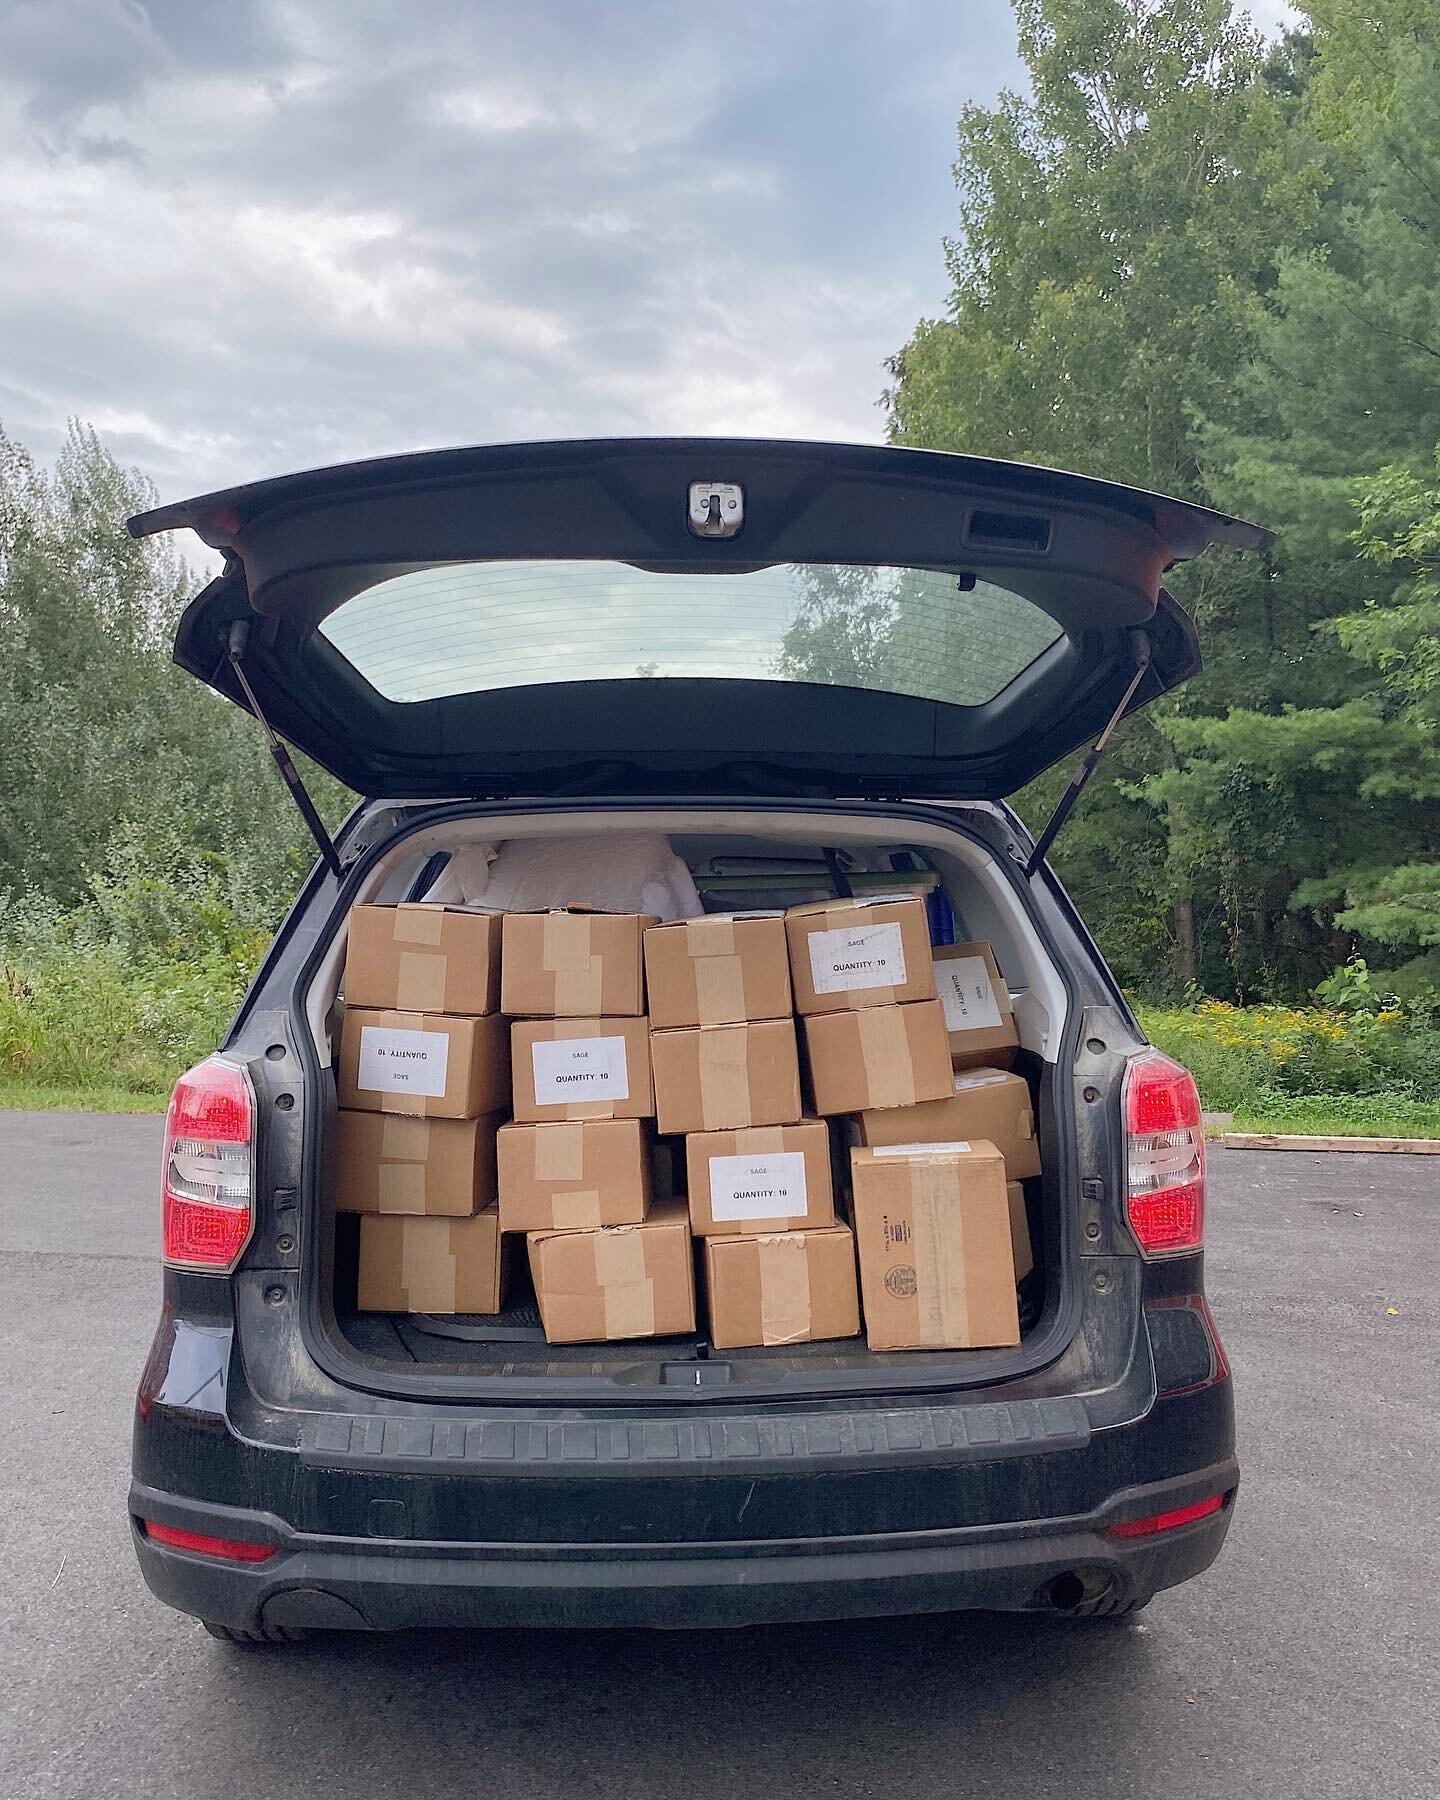 The very LAST load of issue 07!

Get a copy or two for free at sagezine.com before they&rsquo;re gone for good. Order one for your friends, family, neighbor, or coworker!

Thanks for helping us clear inventory to make room for issue 08. 📦 Happy read